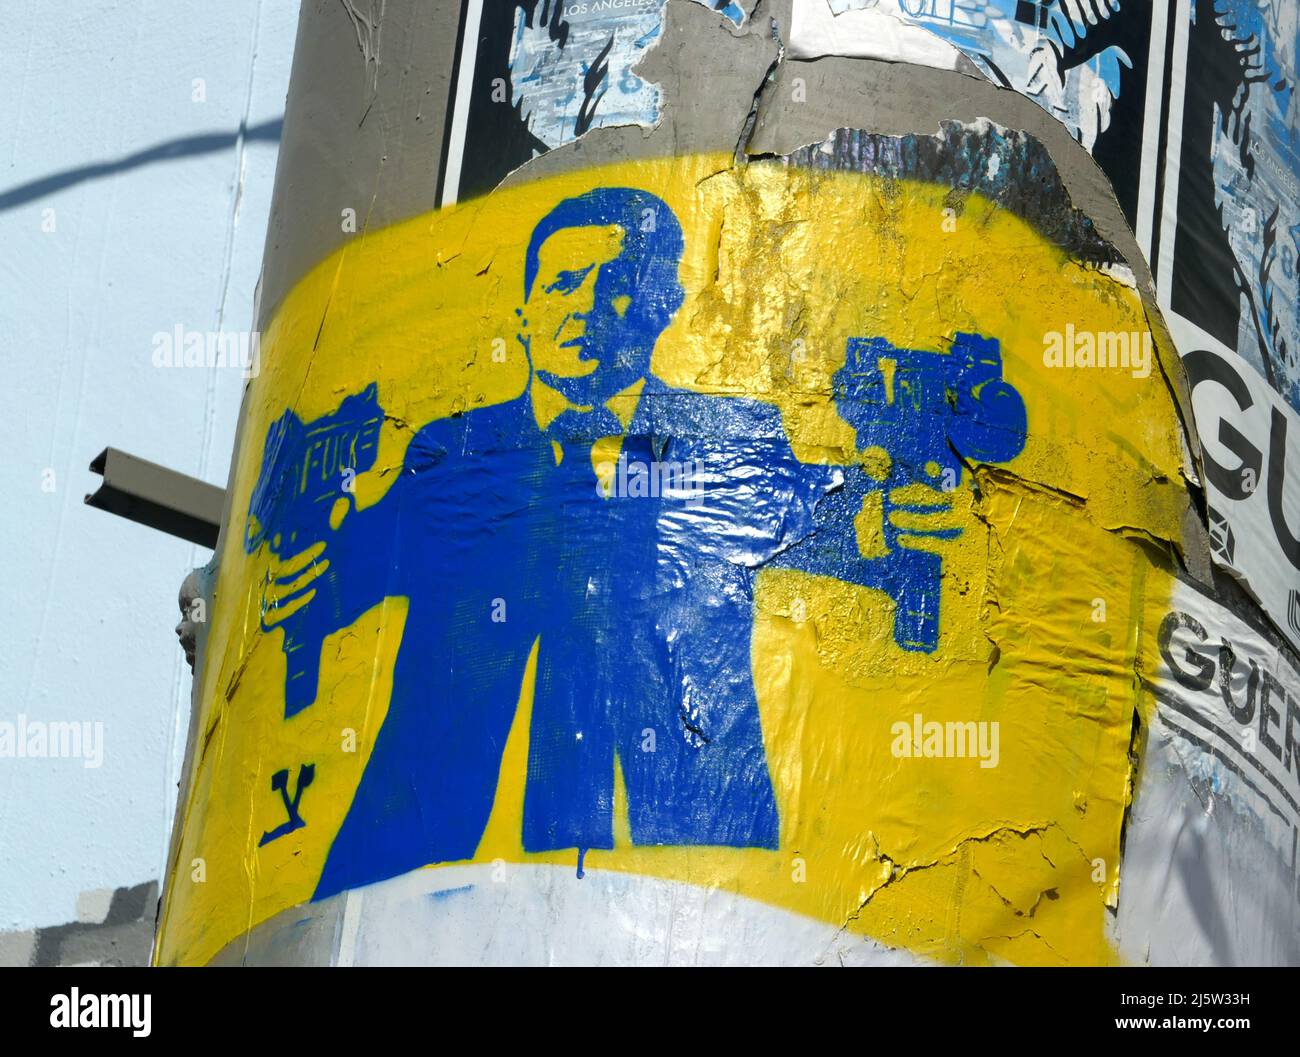 Los Angeles, California, USA 25th April 2022 A General view of atmosphere of Volodymyr Zelenskyy Street Art Mural with Ukranian Flag Colors on Melrose Avenue on April 25, 2022 in Los Angeles, California, USA. Photo by Barry King/Alamy Live News Stock Photo